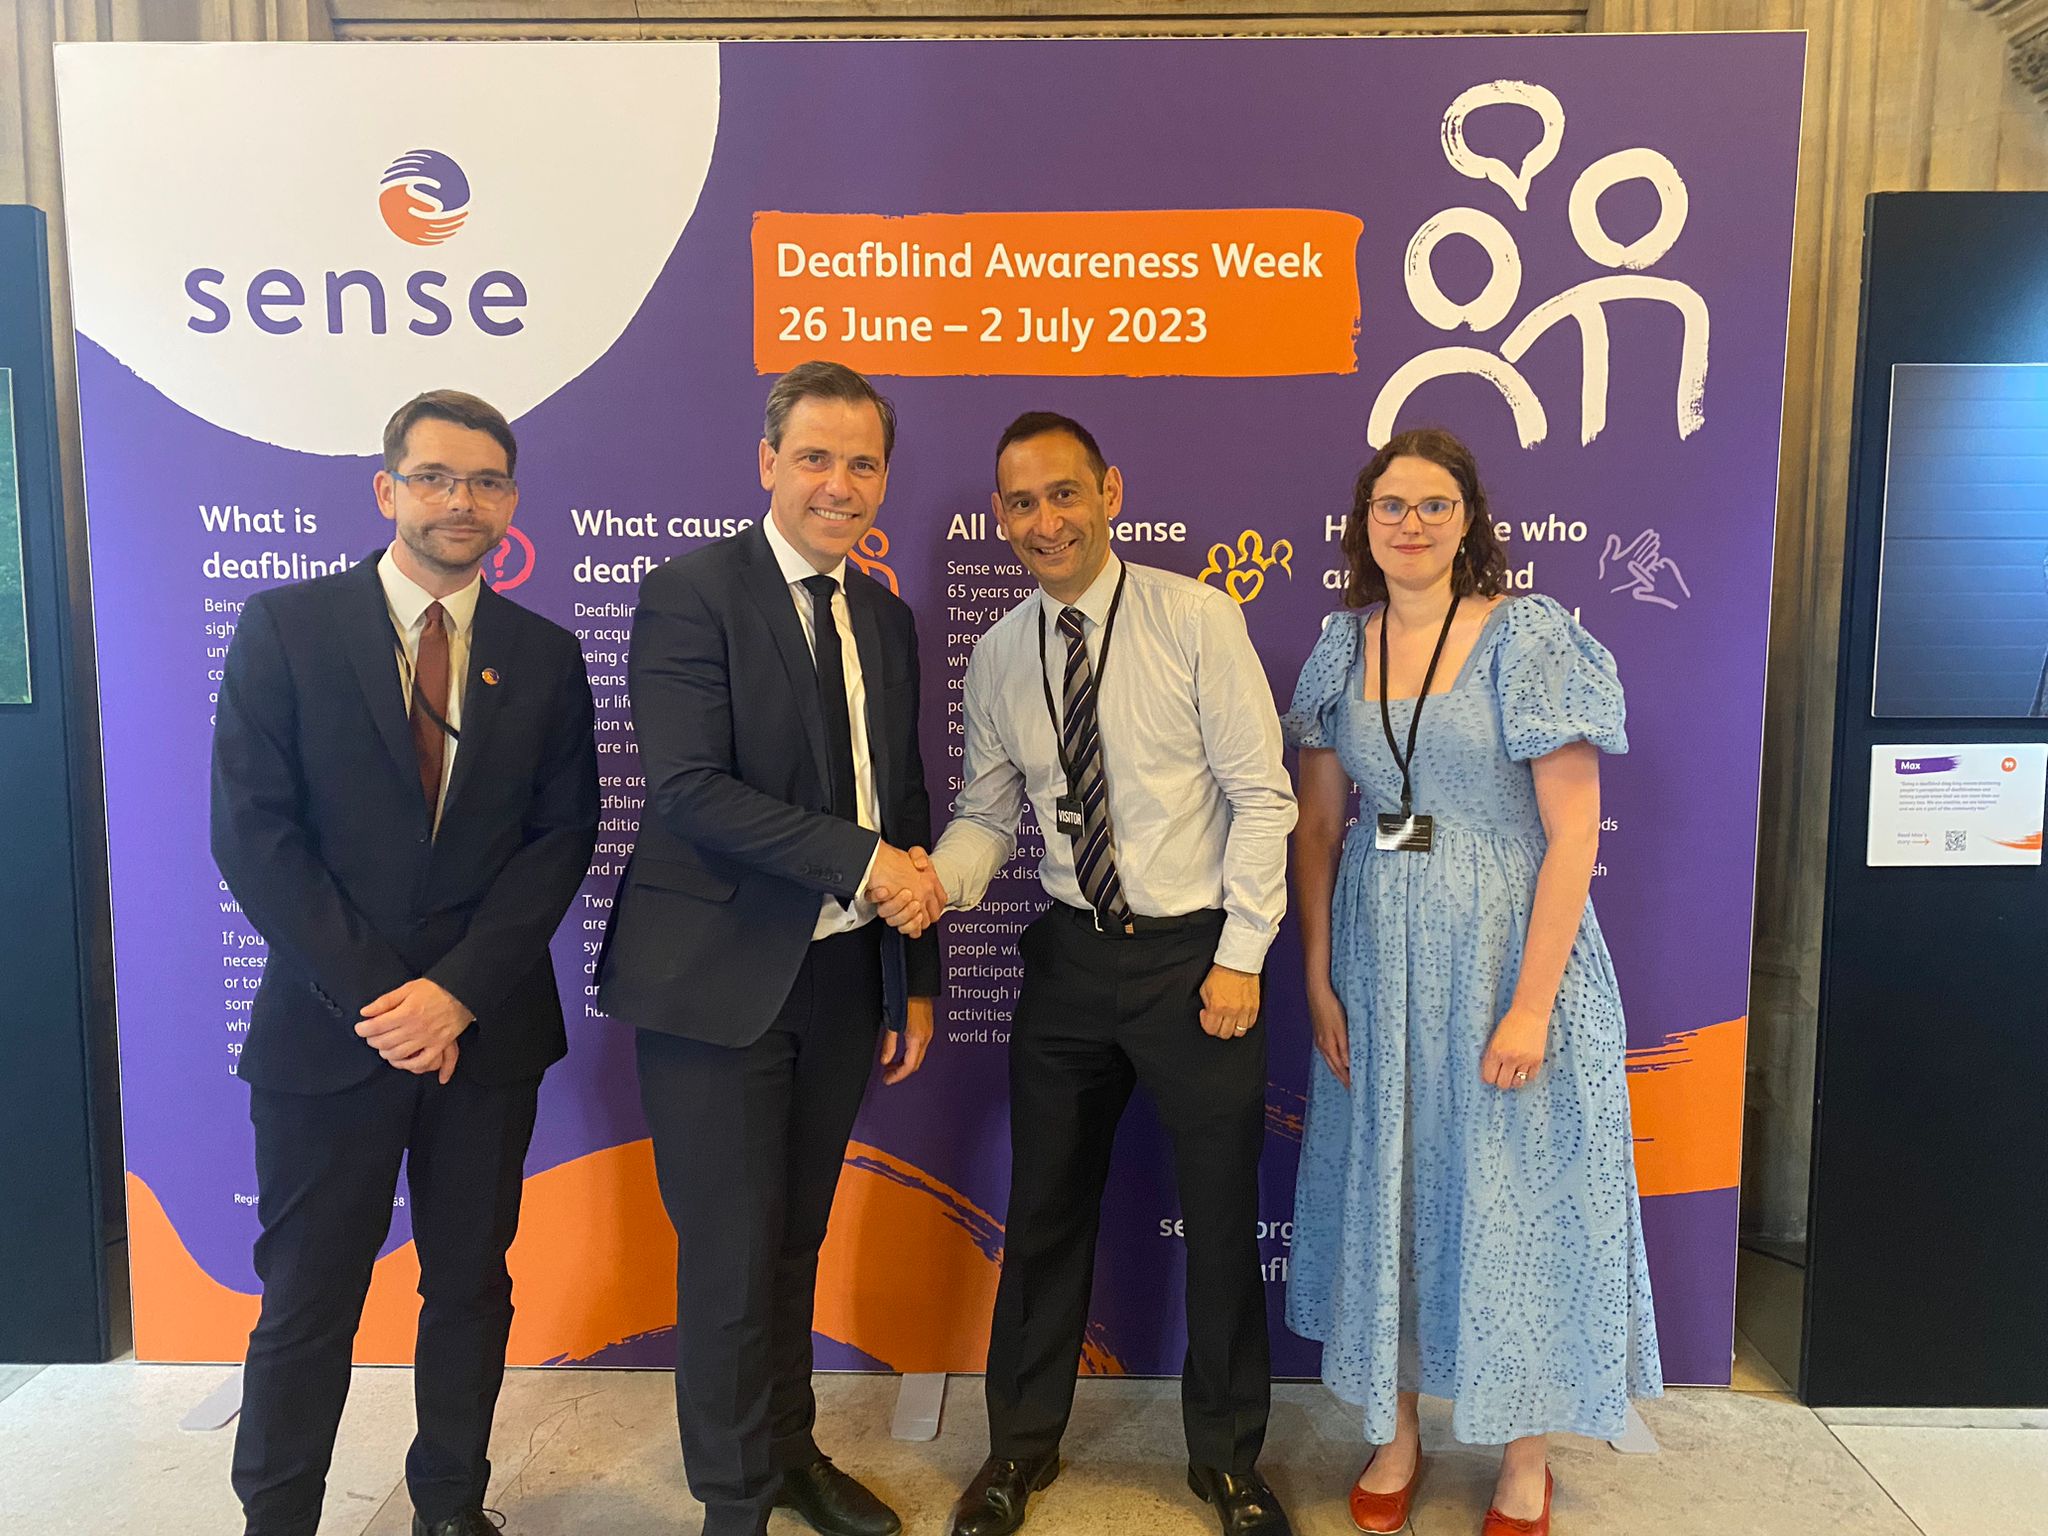 Chris Evans MP stands with three representatives from Sense. Background board reads Deafblind Awareness Week 26th June to 2nd July